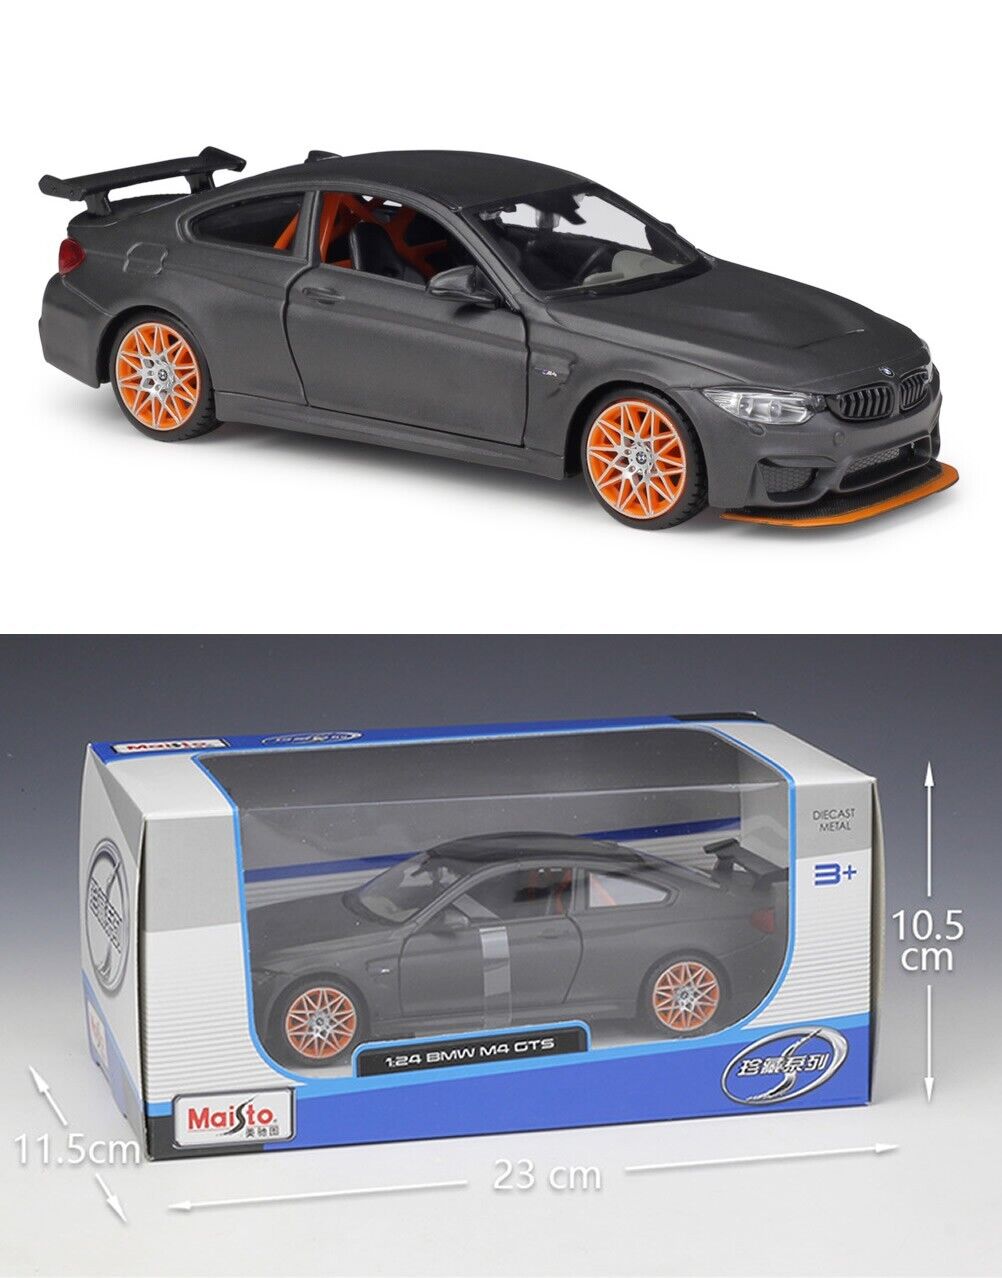 MAISTO 1:24 BMW M4 GTS GY Alloy Diecast Vehicle Car MODEL TOY Gift Collection